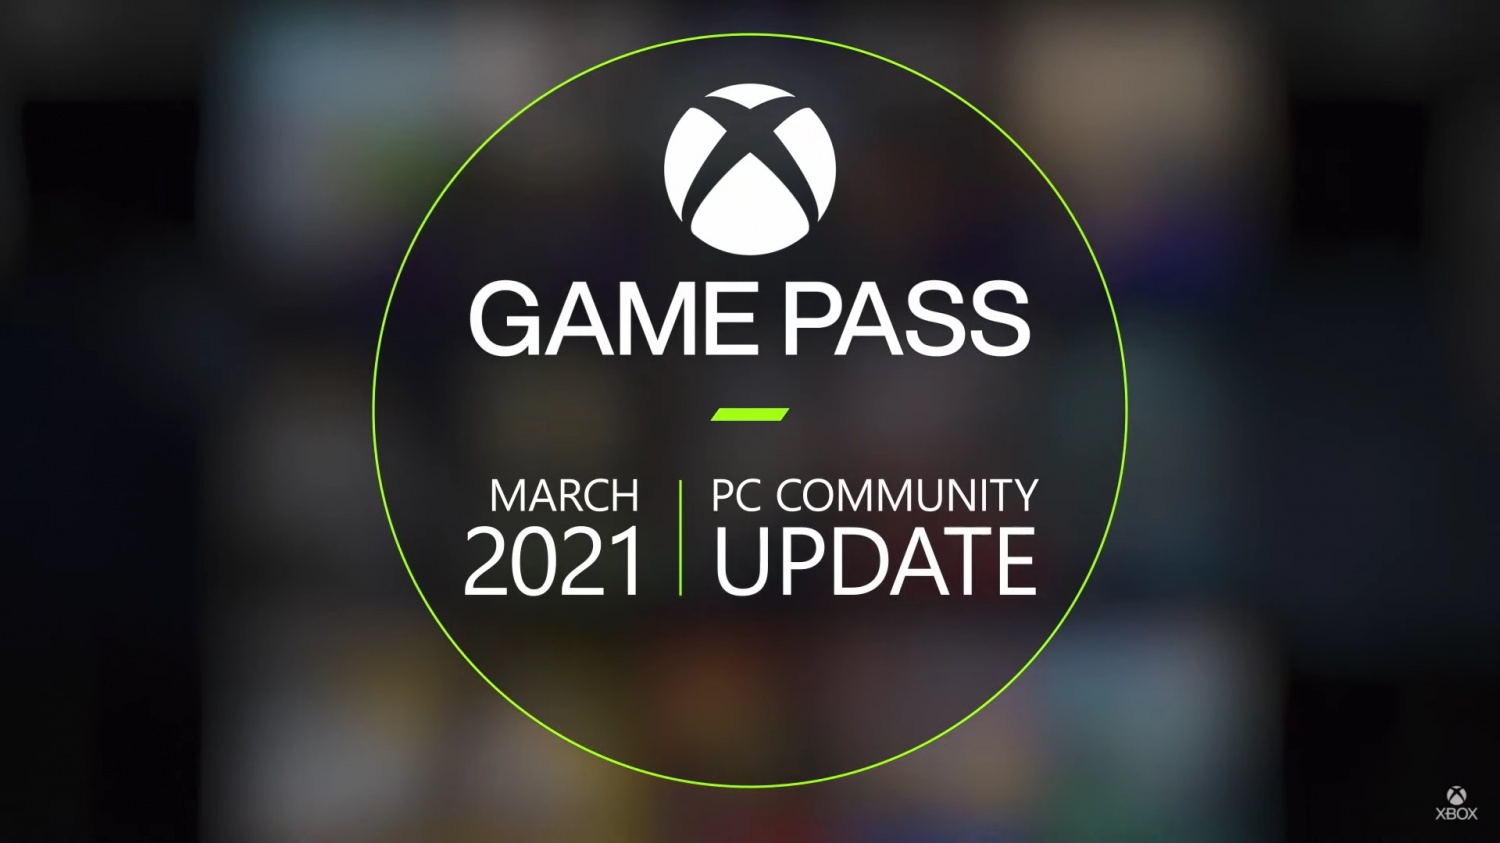 How to Use EA Play With Xbox Game Pass for PC